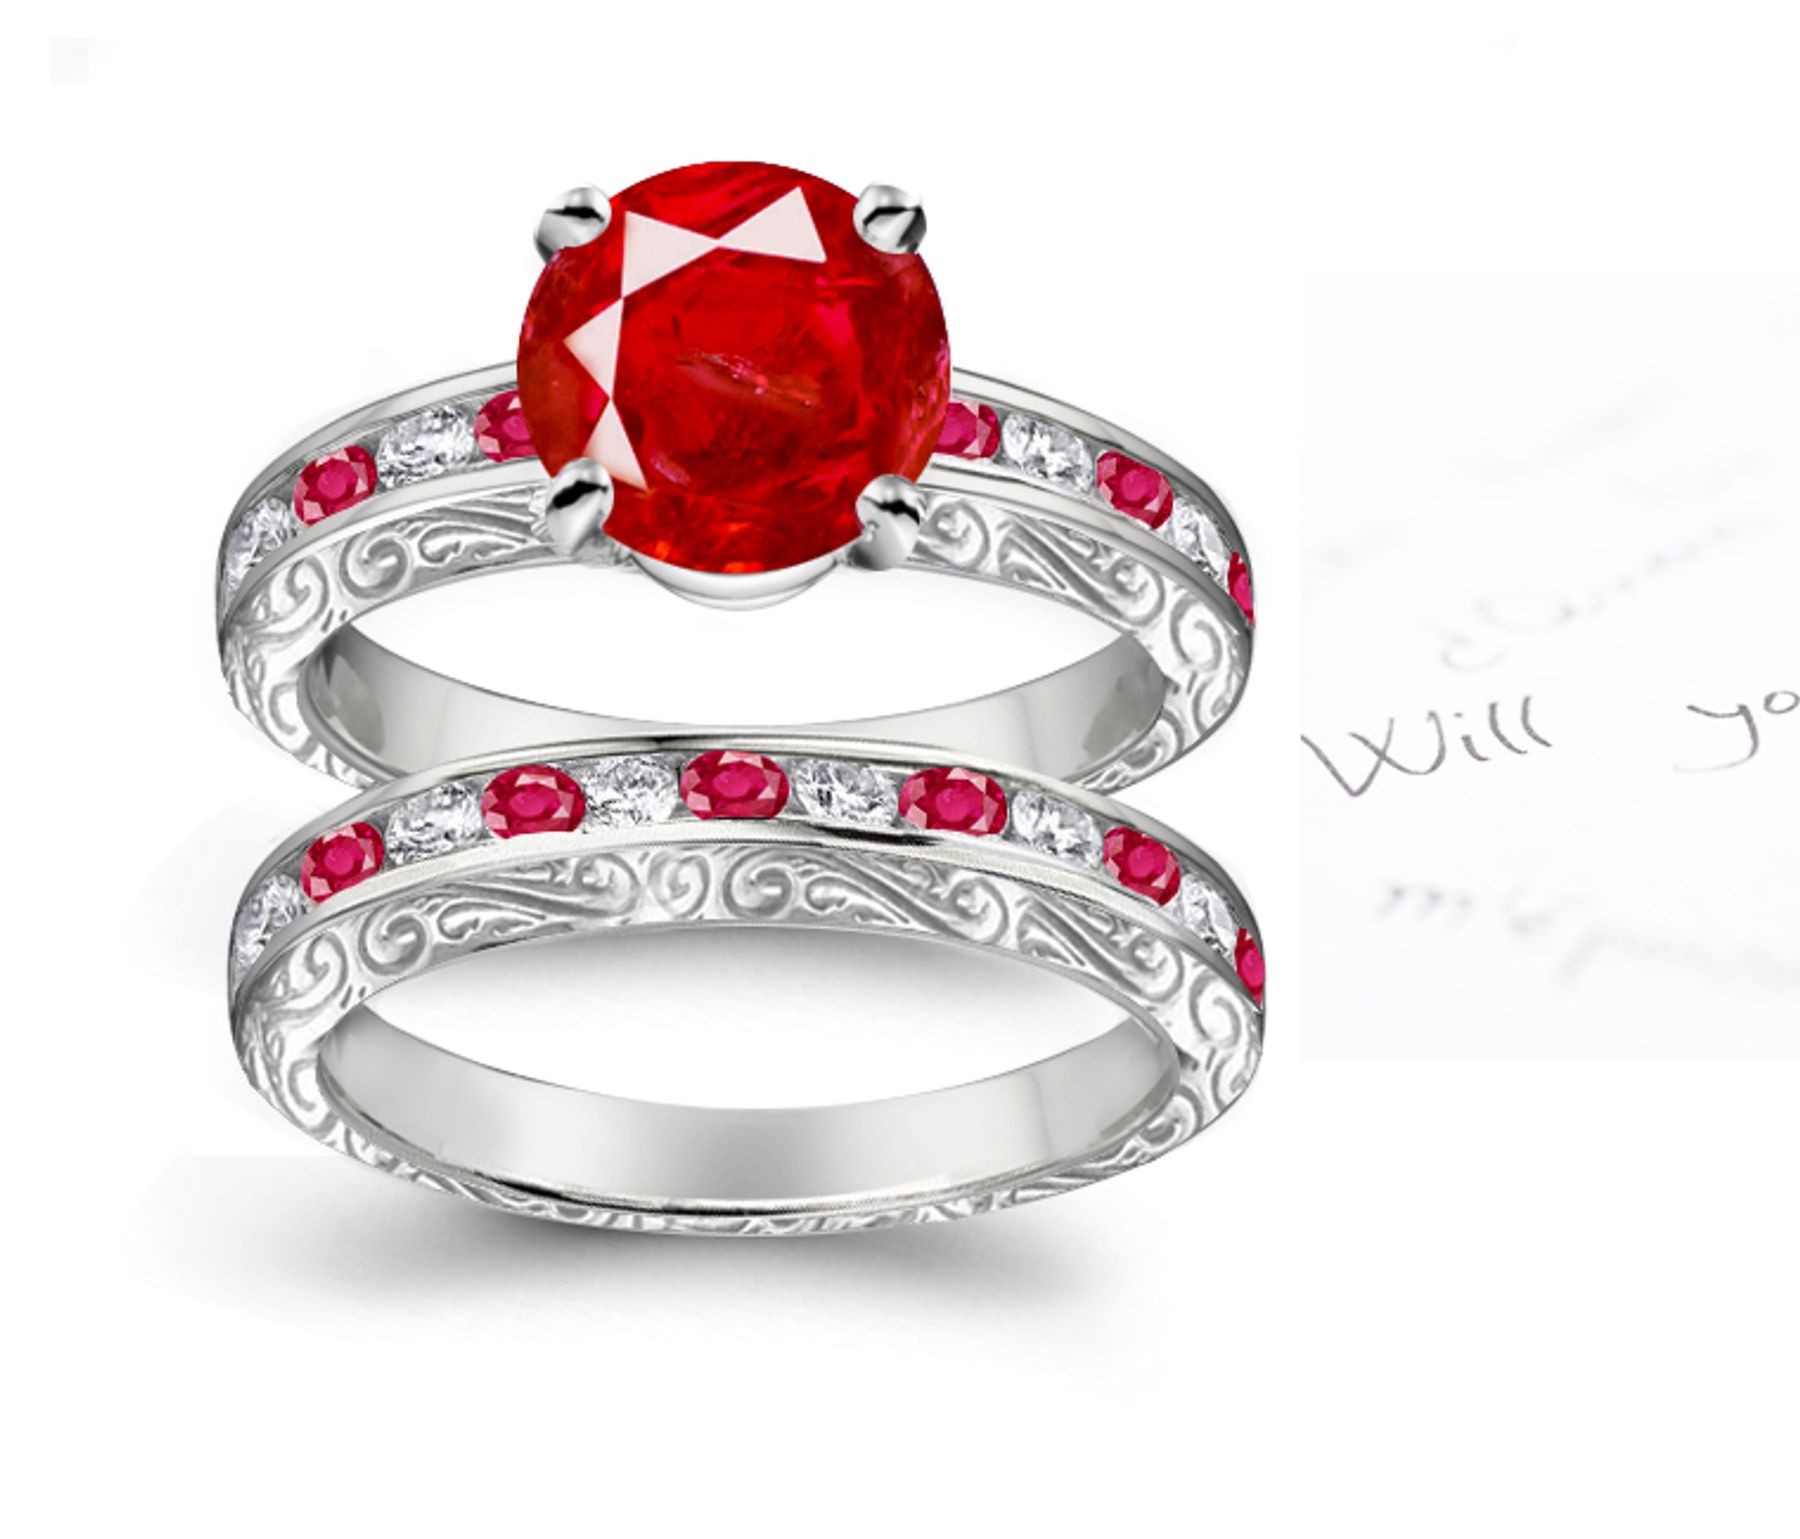 The Family Heirloom: A Noted Round Ruby & Scrolling Foliate Butterfly Motifs Decorated Ring & Wedding Band Created With Eco-Friendly Metals